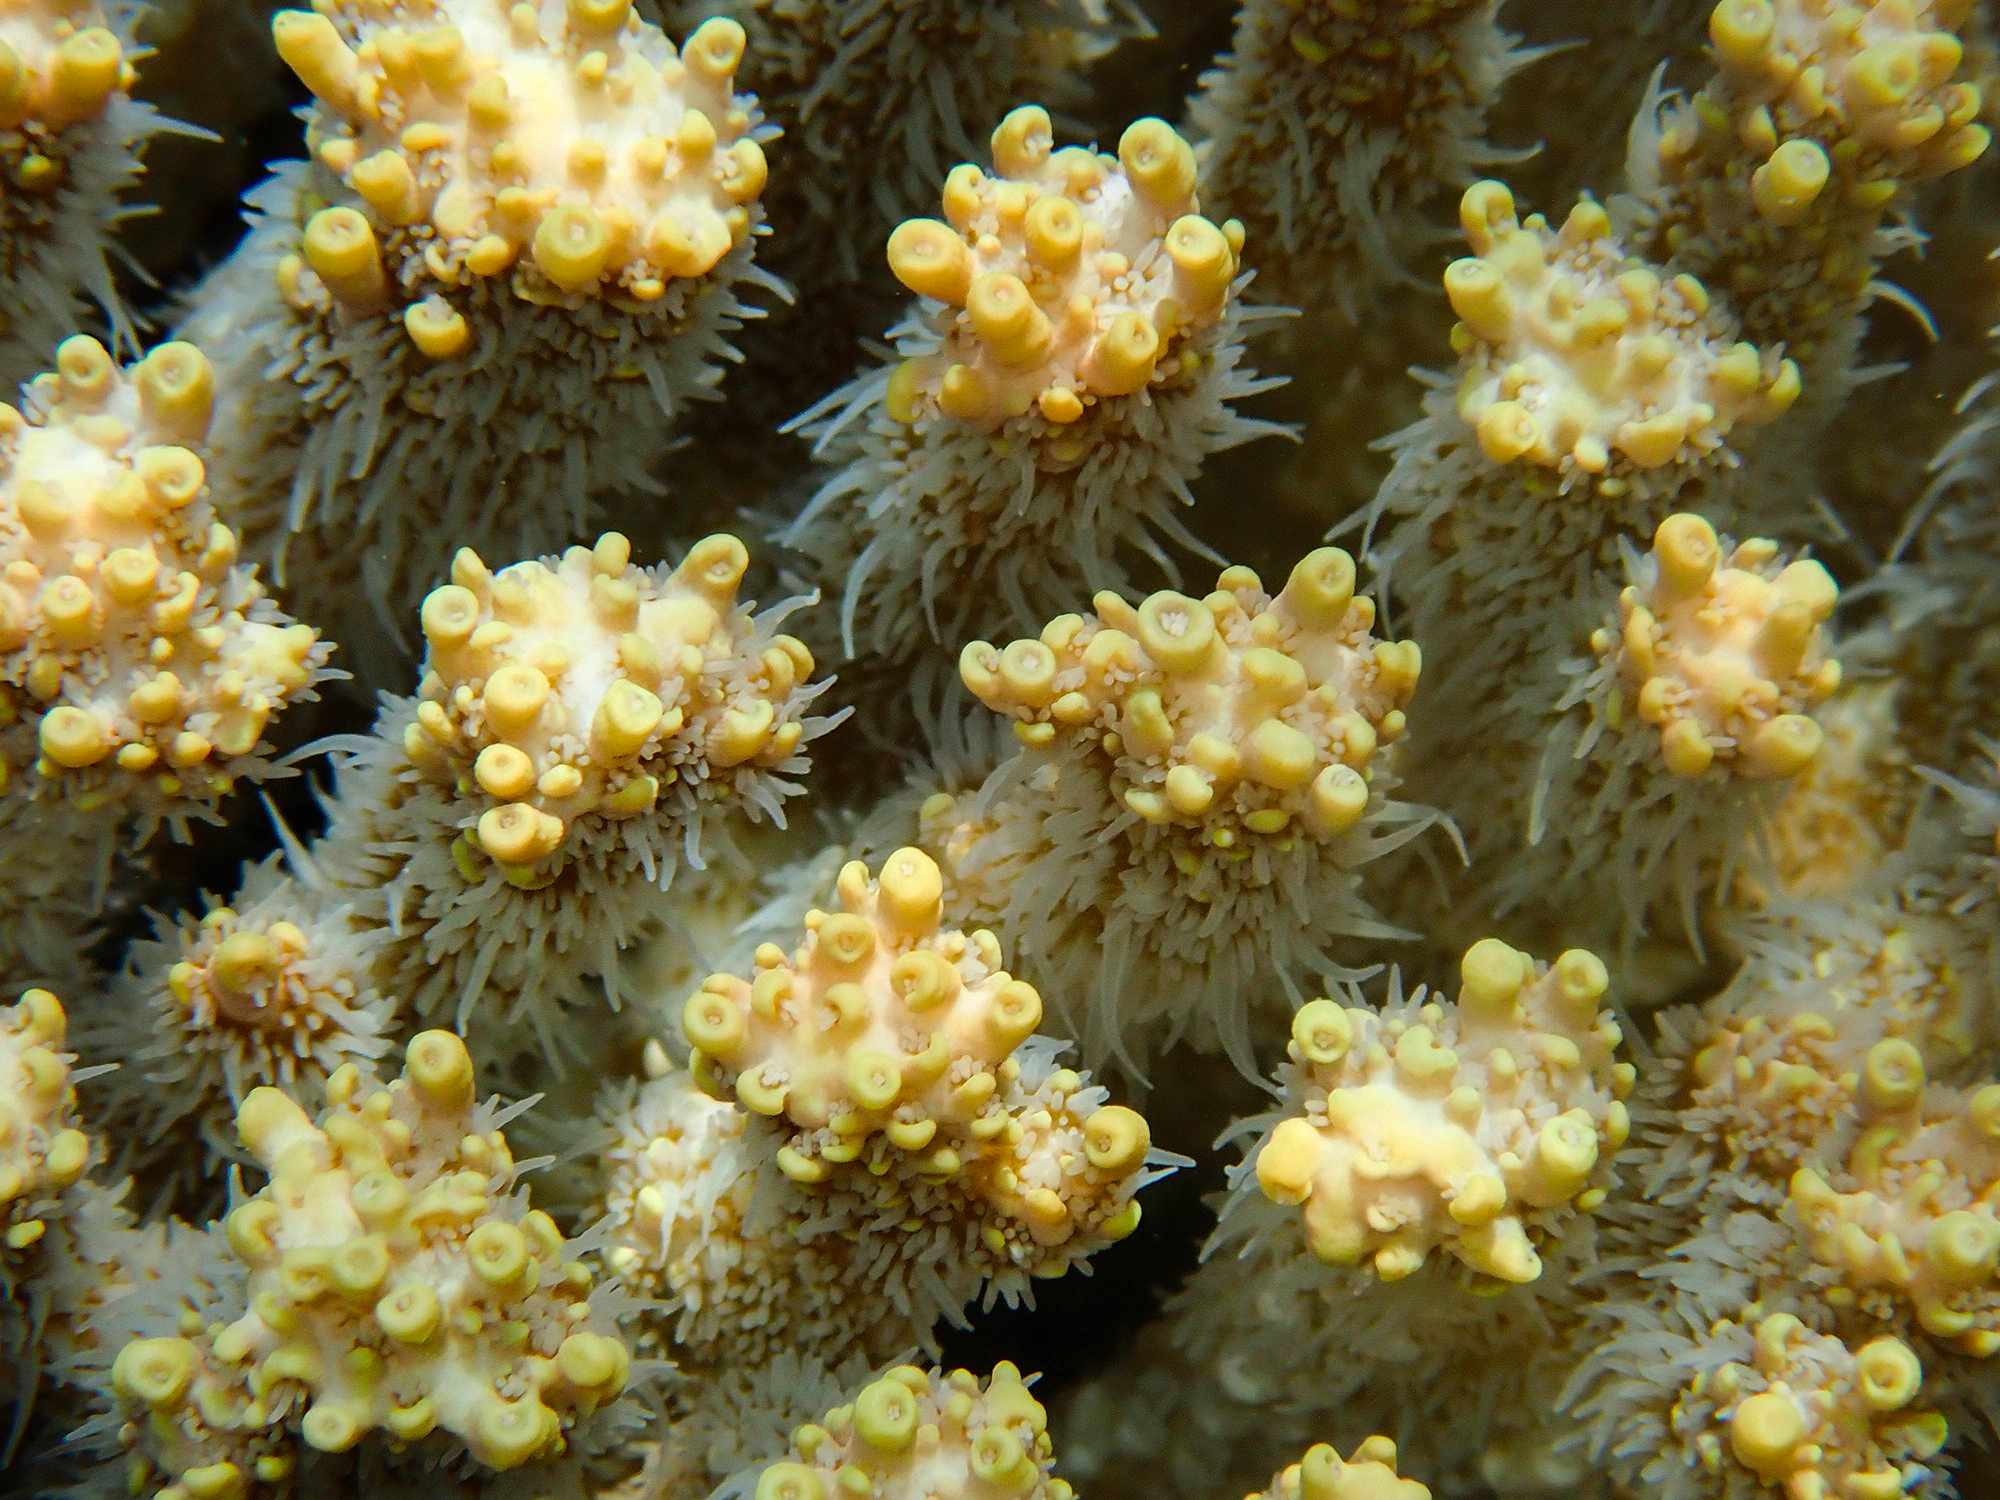 Atypical corals: lessons from these organisms living under extreme conditions